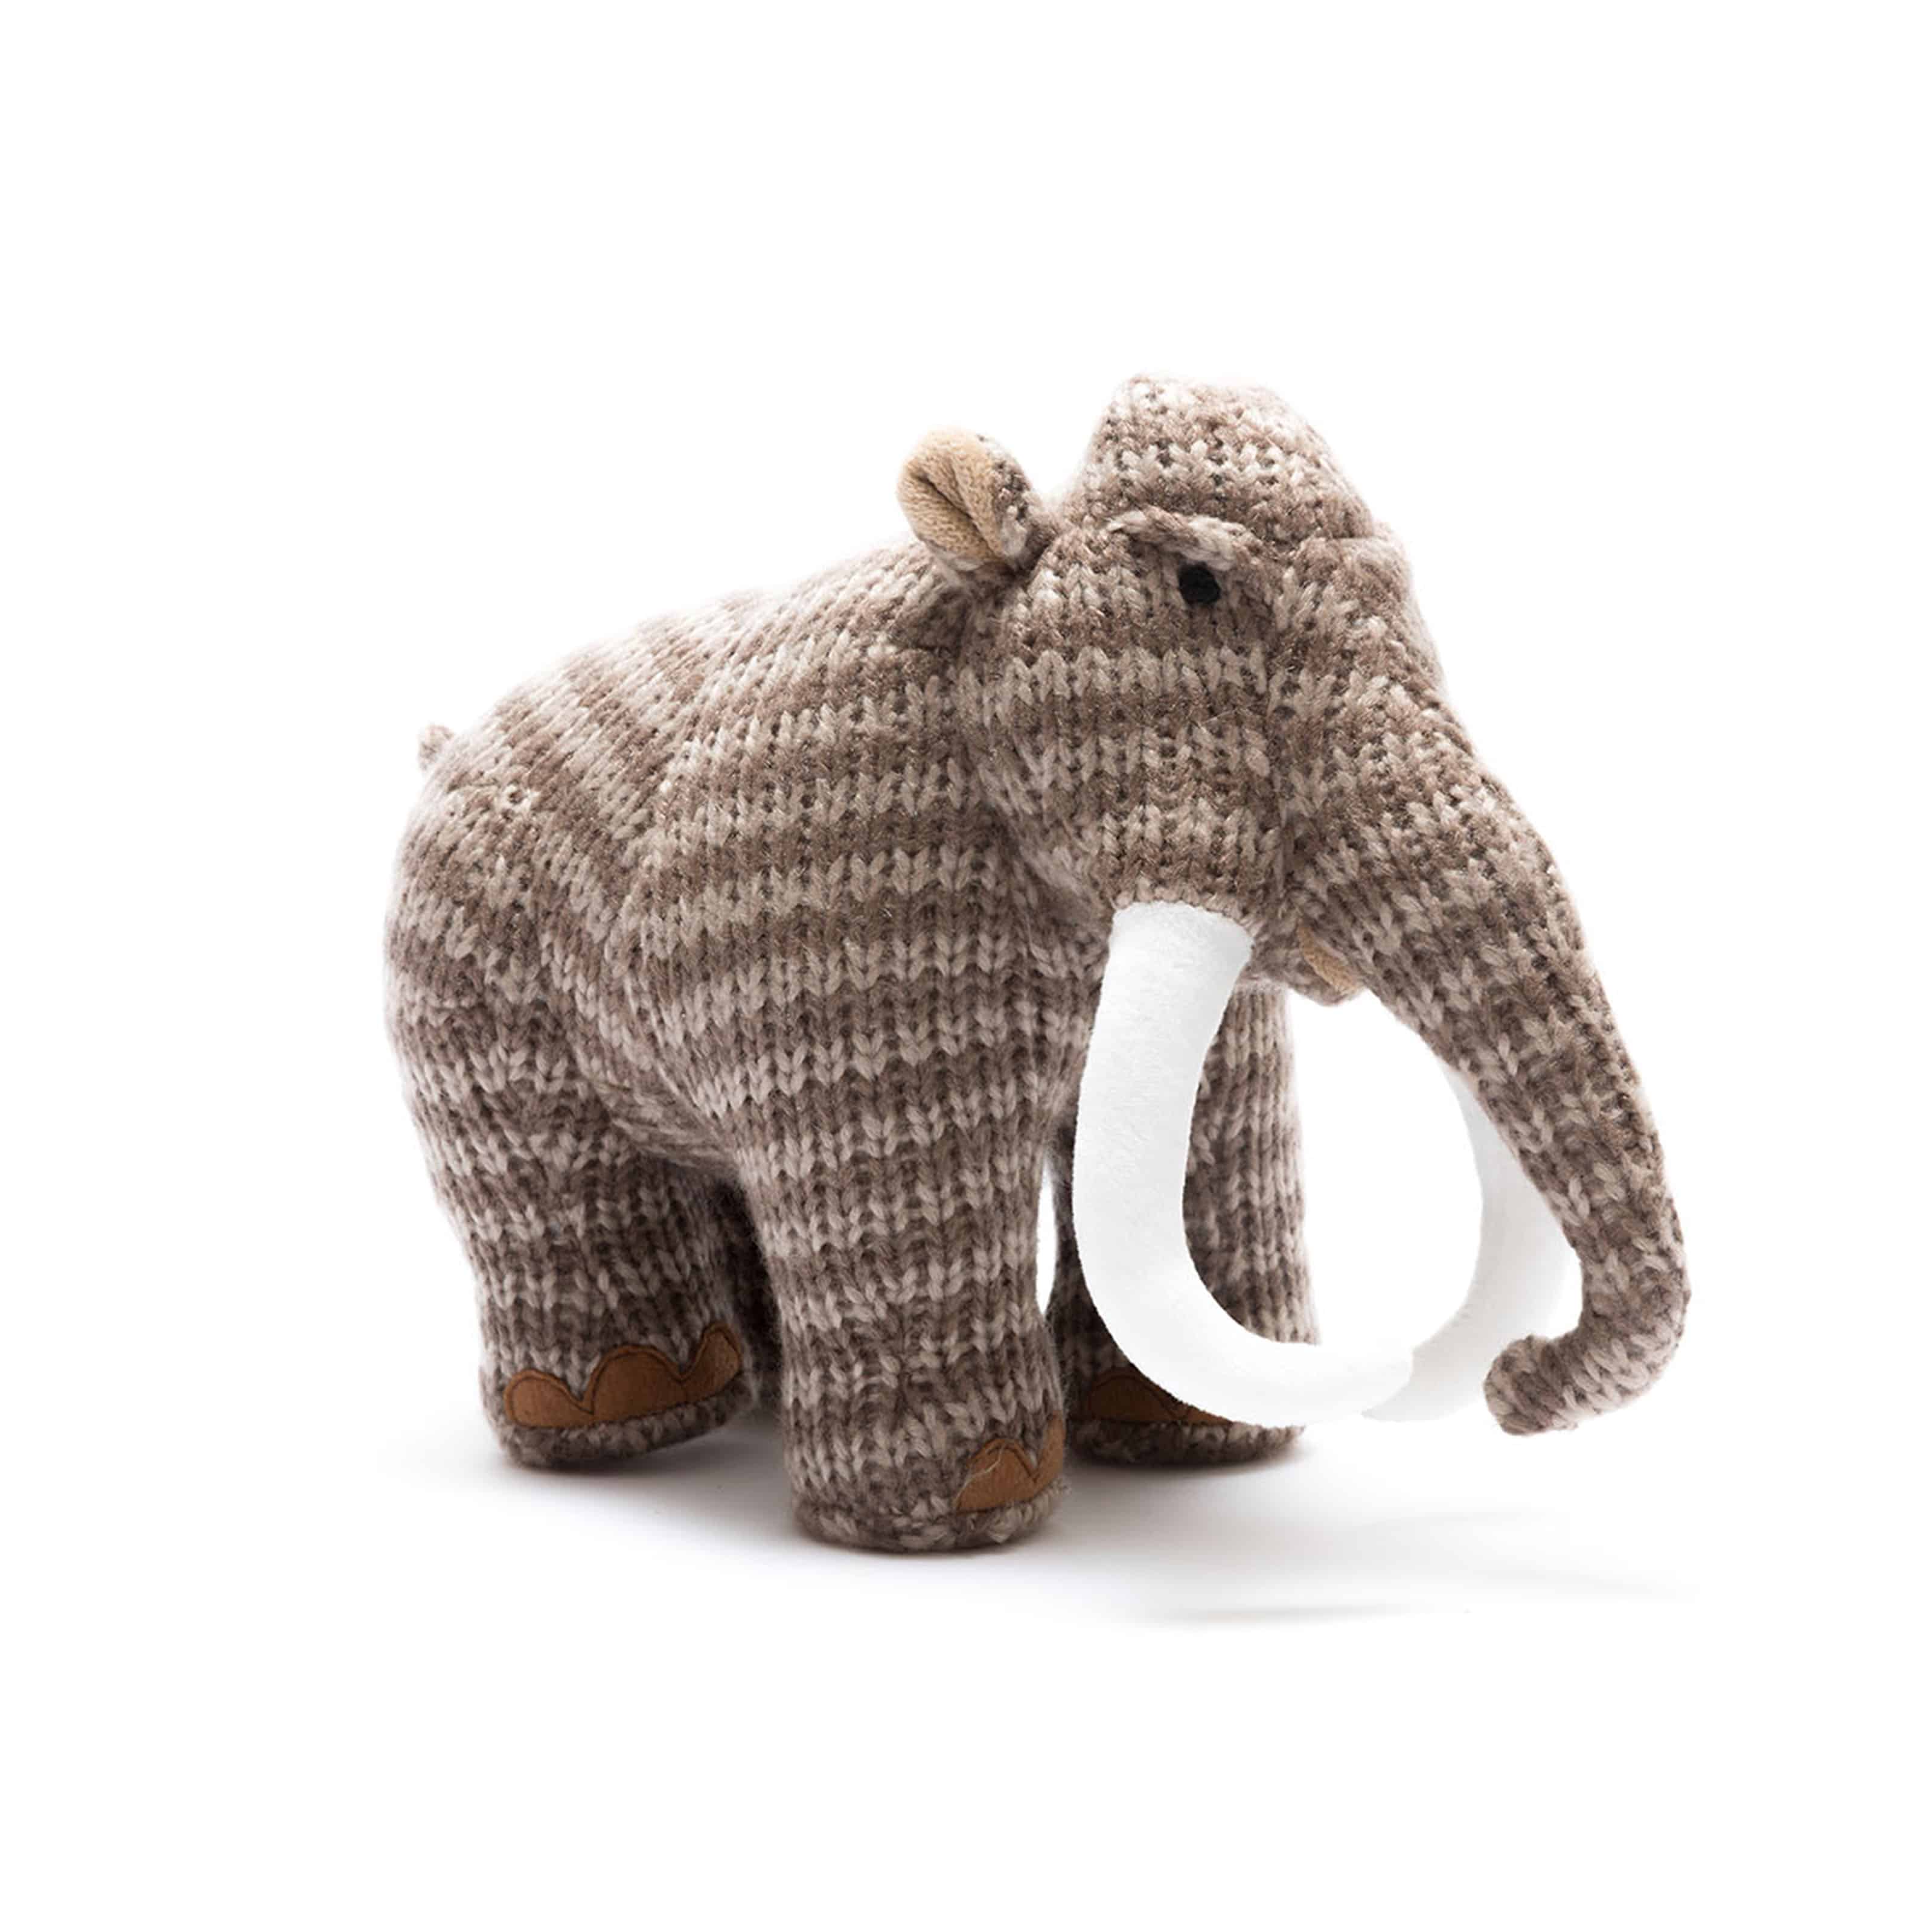 Knitted Medium Wooly Mammoth